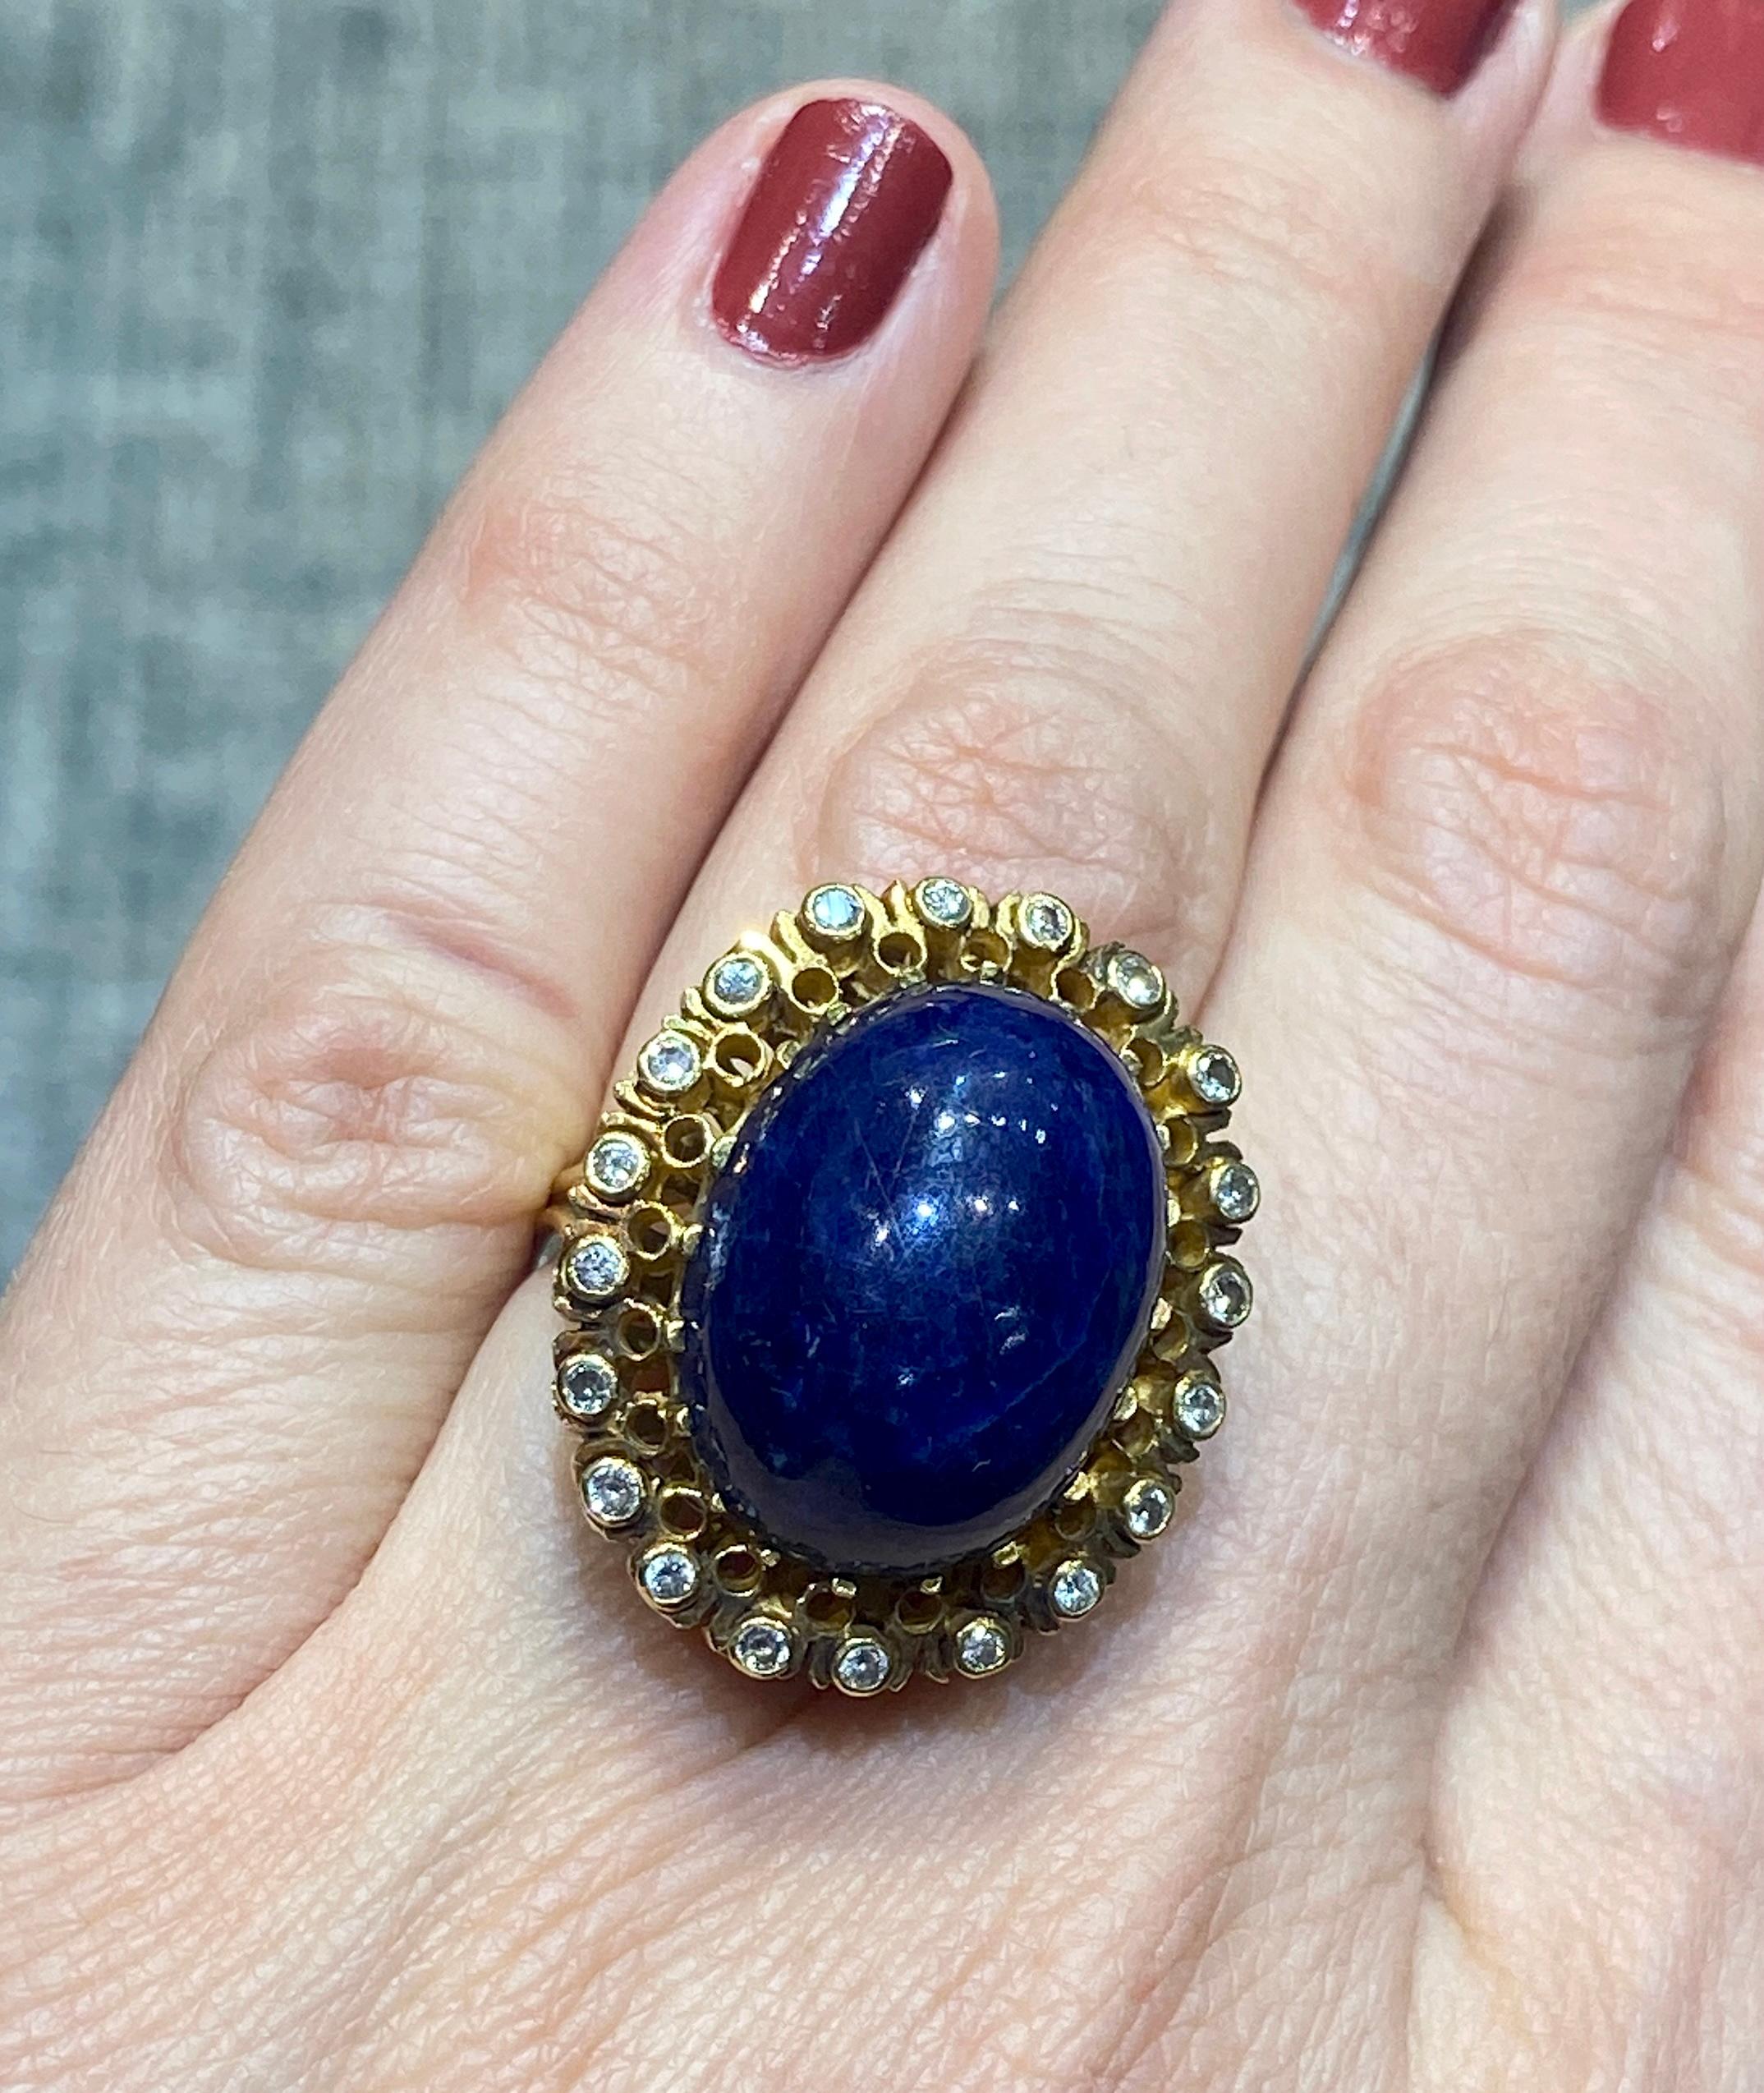 This beautiful 18k gold Lalaounis cocktail ring consists of a large cabochon lapis lazuli surrounded by small round cut diamonds. The ring is a part of a set with a pair of earrings pictured below and listed separately on 1st Dibs